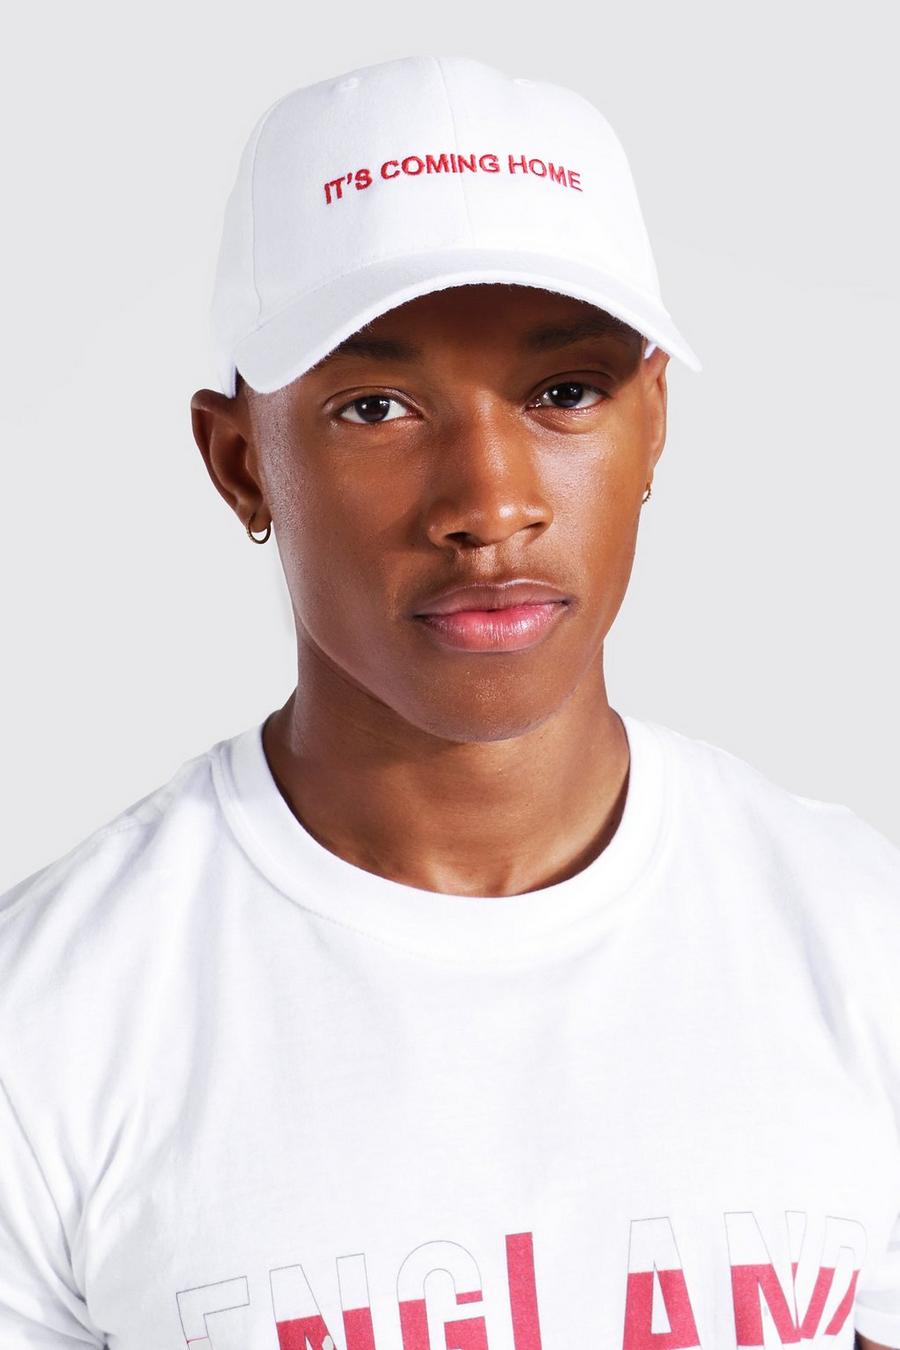 Casquette "It's coming home", White image number 1